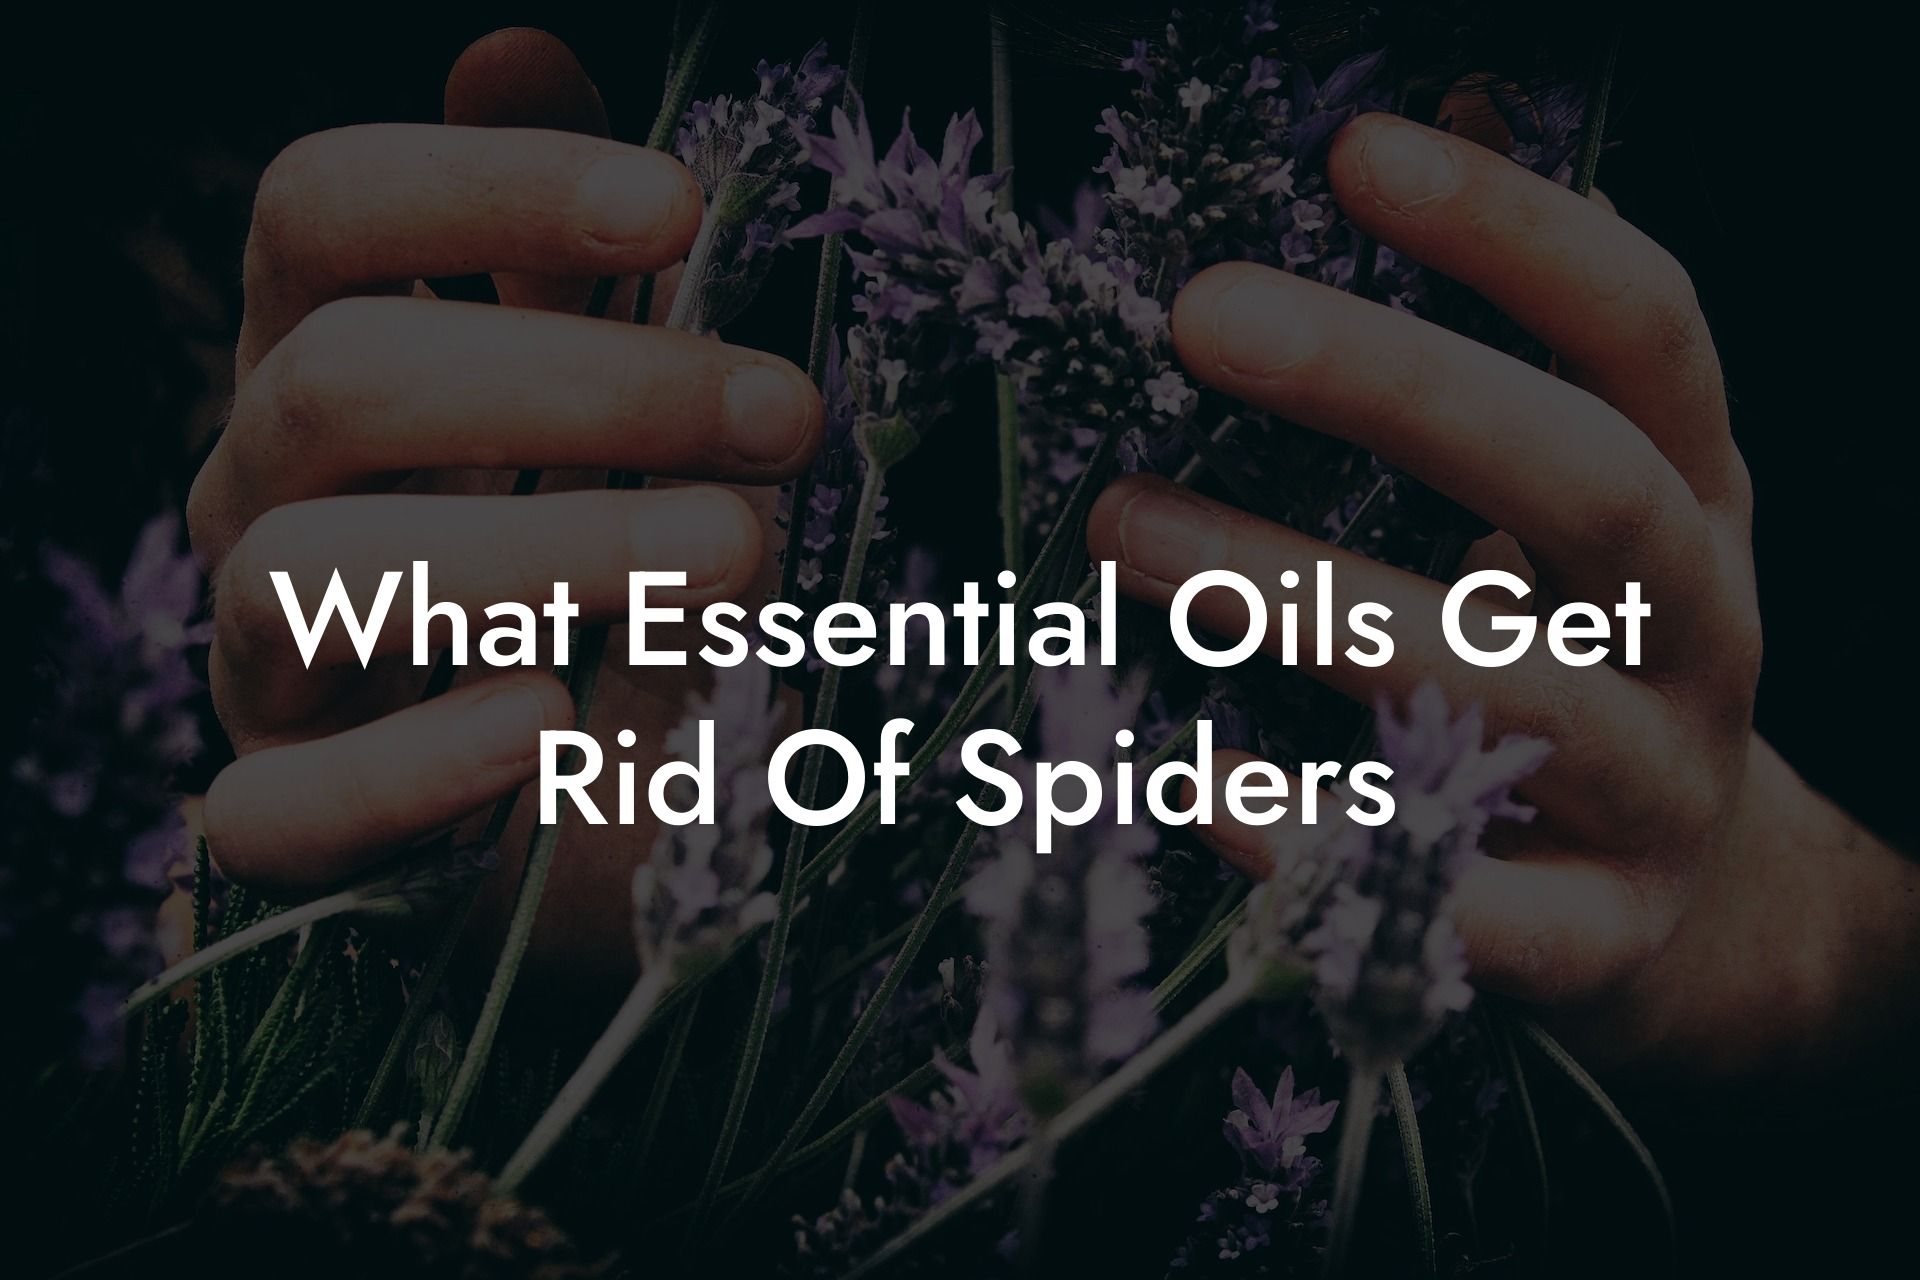 What Essential Oils Get Rid Of Spiders